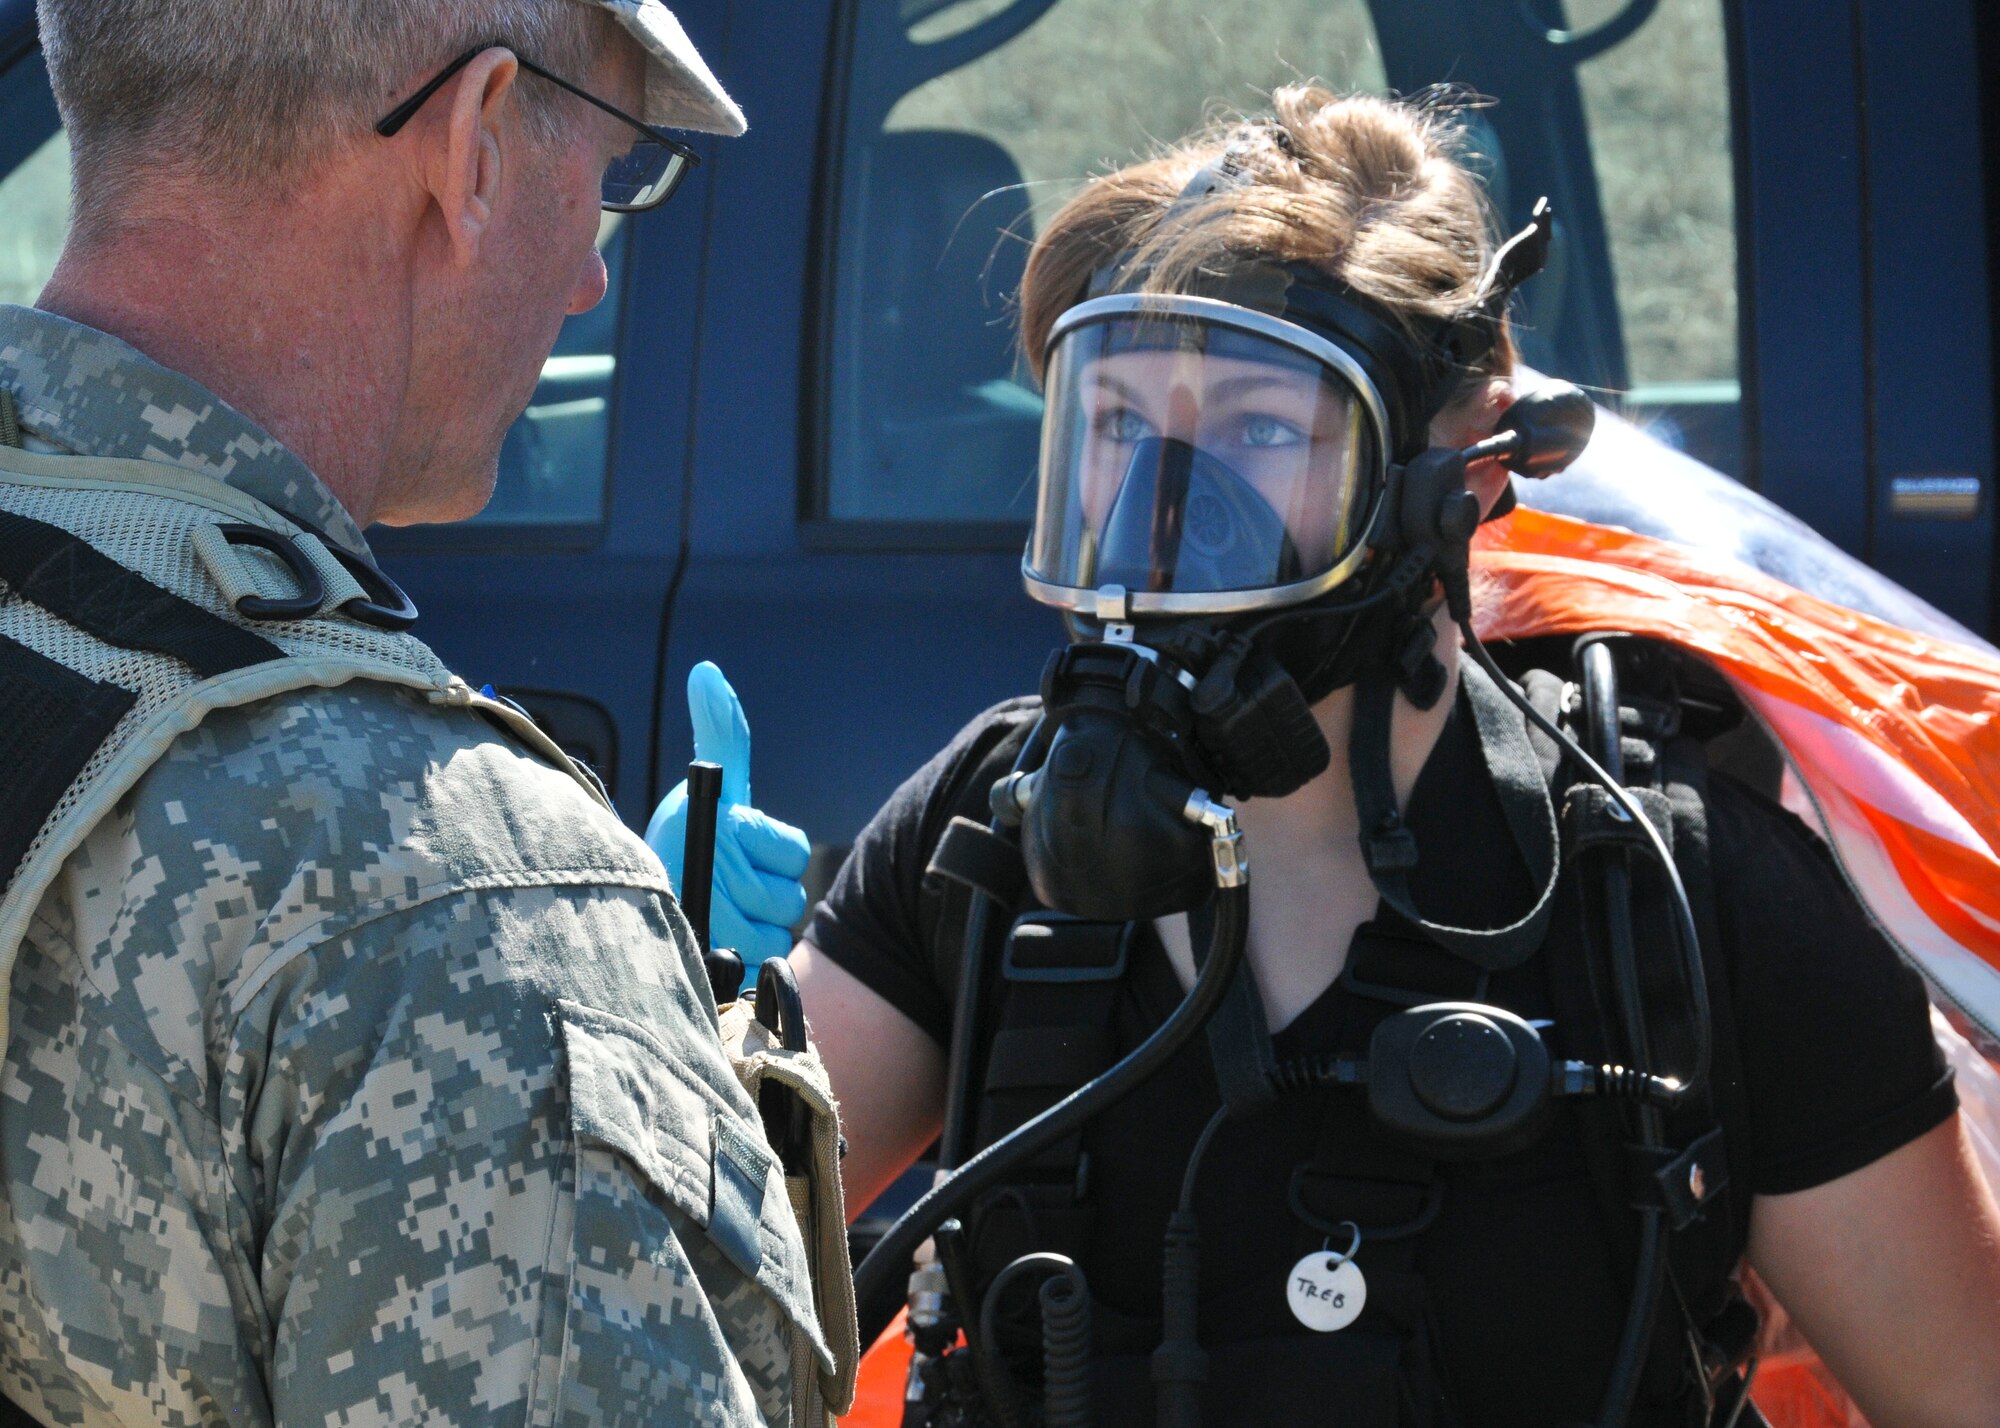 Sgt. Kelley Trebesch, 82nd Civil Support Team survey specialist, dons her protective gear before heading down range into the exercise incident area at the water reclamation plant in Sioux Falls, S.D., March 19, 2015. The survey team is known as the 'heartbeat' of the CST and goes into the contaminated area to obtain samples of potentially hazardous solids and liquids for the unit's mobile lab to analyze.(National Guard photo by Staff Sgt. Luke Olson/Released)